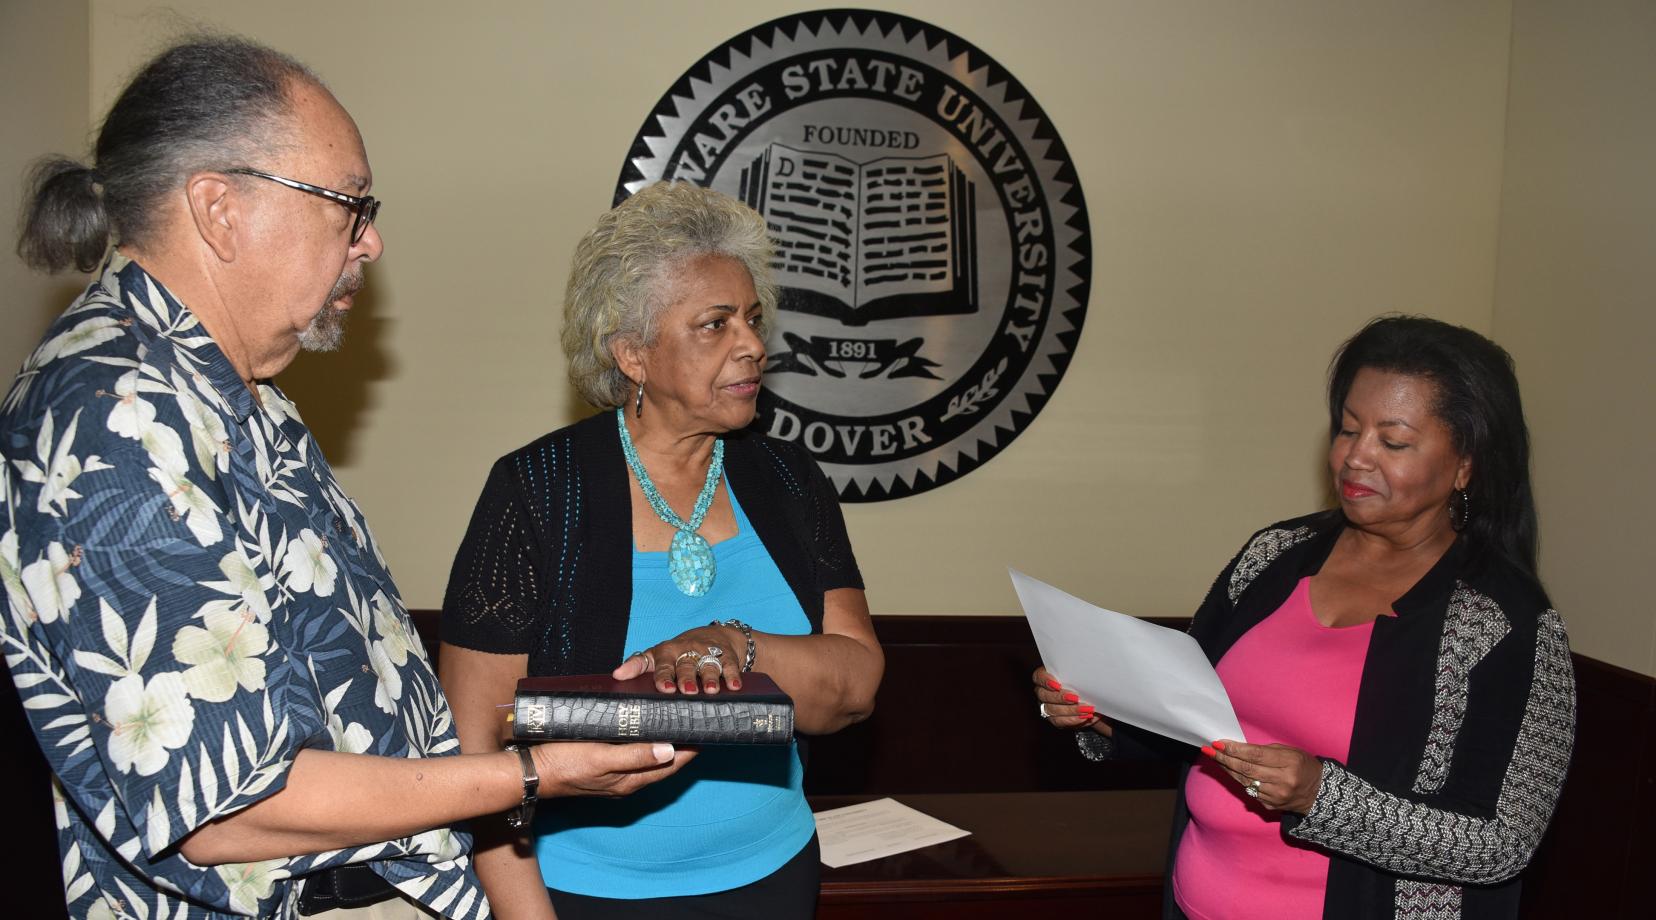 <p>J. Cagney France, fiance of Esthelda Parker Selby, center, holds the bible as she is sworn in as a Board of Trustees member by Board Chairperson Devona Williams.</p>
